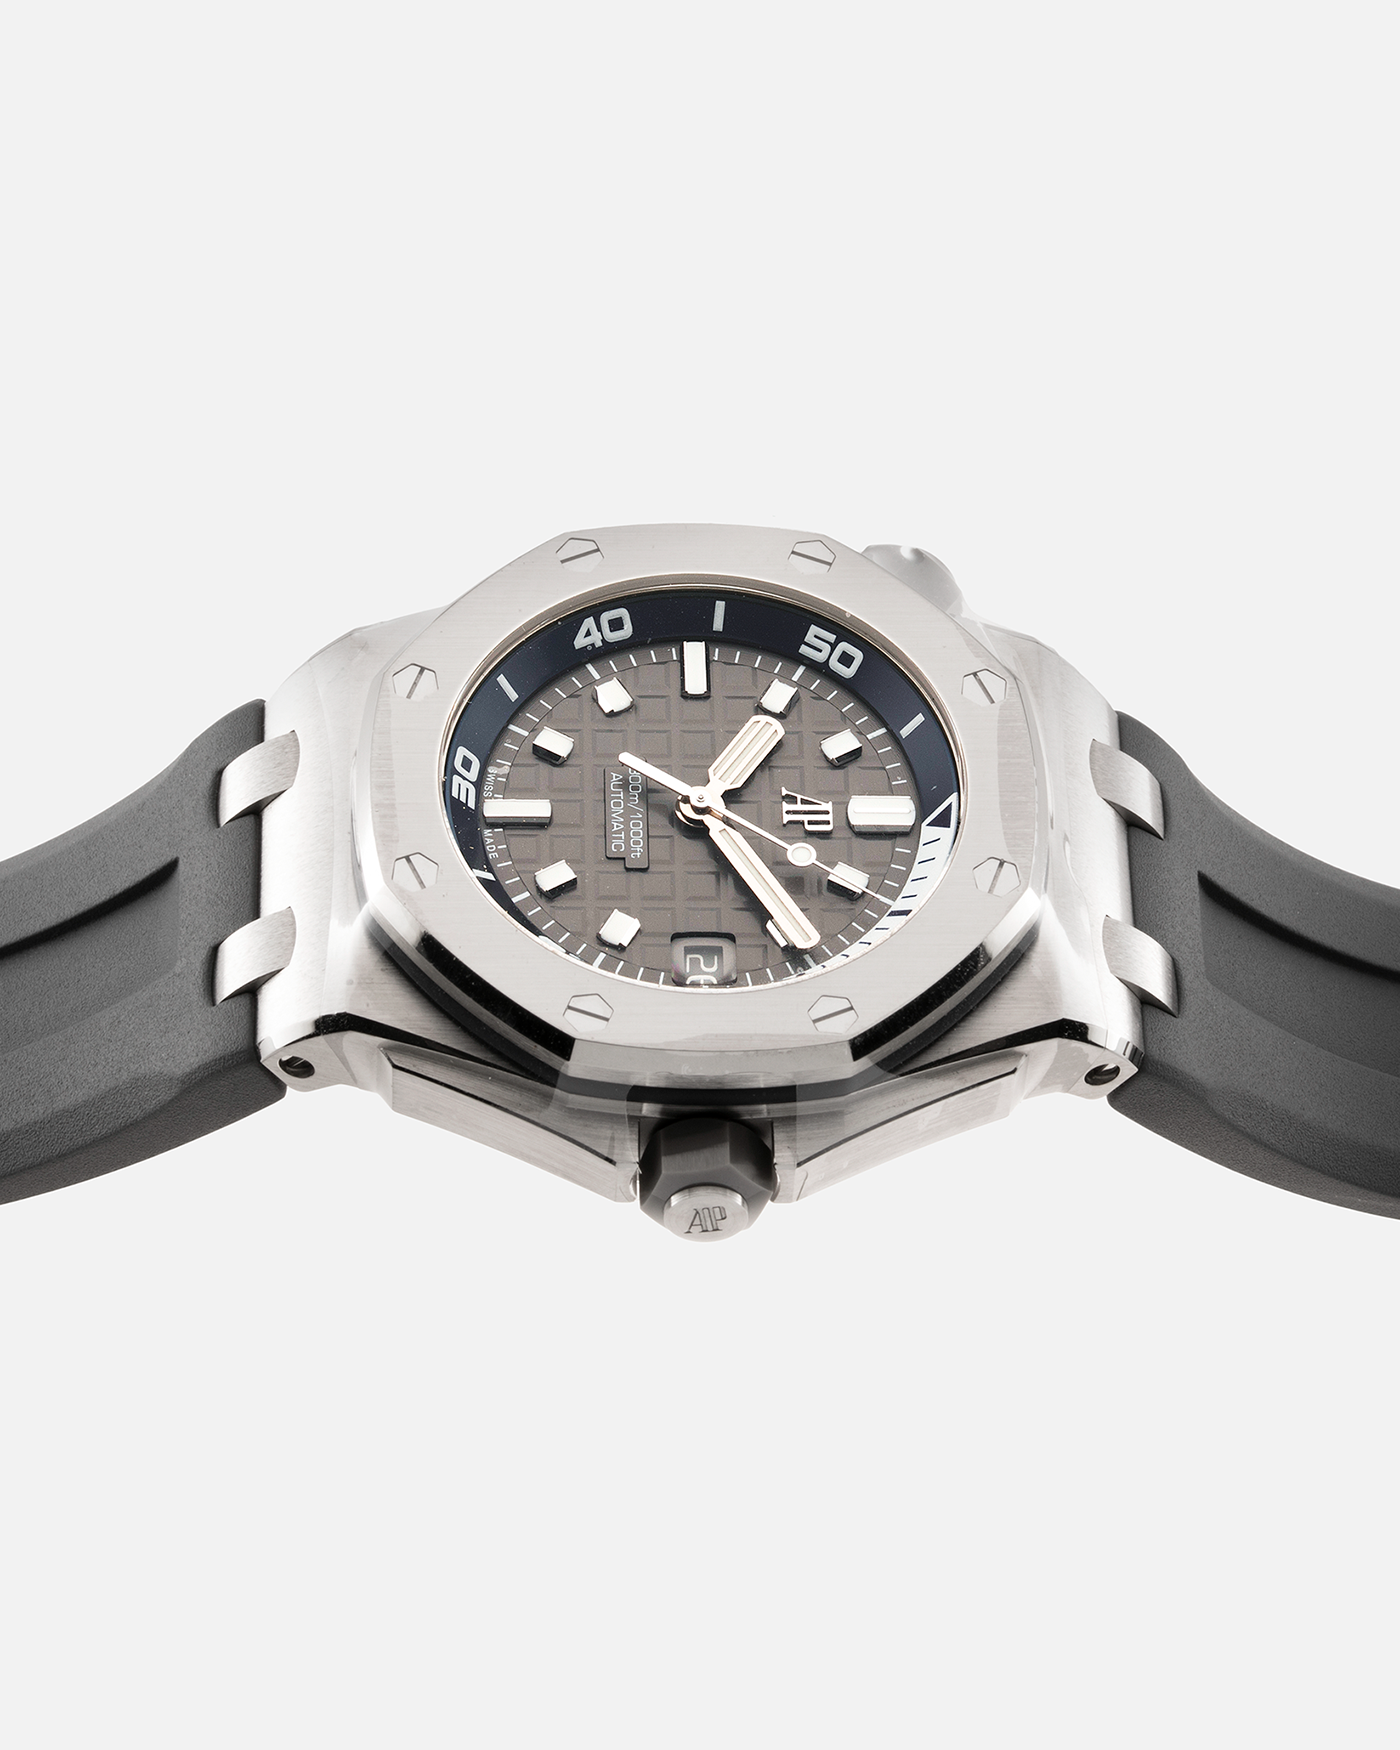 Brand: Audemars Piguet Year: 2021 Model: Royal Oak Offshore Diver Reference Number: 15720ST Material: Stainless Steel Movement: Cal. 4308, Self-Winding Case Diameter: 42mm Bracelet/Strap: Grey Audemars Piguet Rubber Strap with Stainless Steel Signed Tang Buckle, Additional Dark Blue Audemars Piguet Rubber Strap with Stainless Steel Signed Tang Buckle